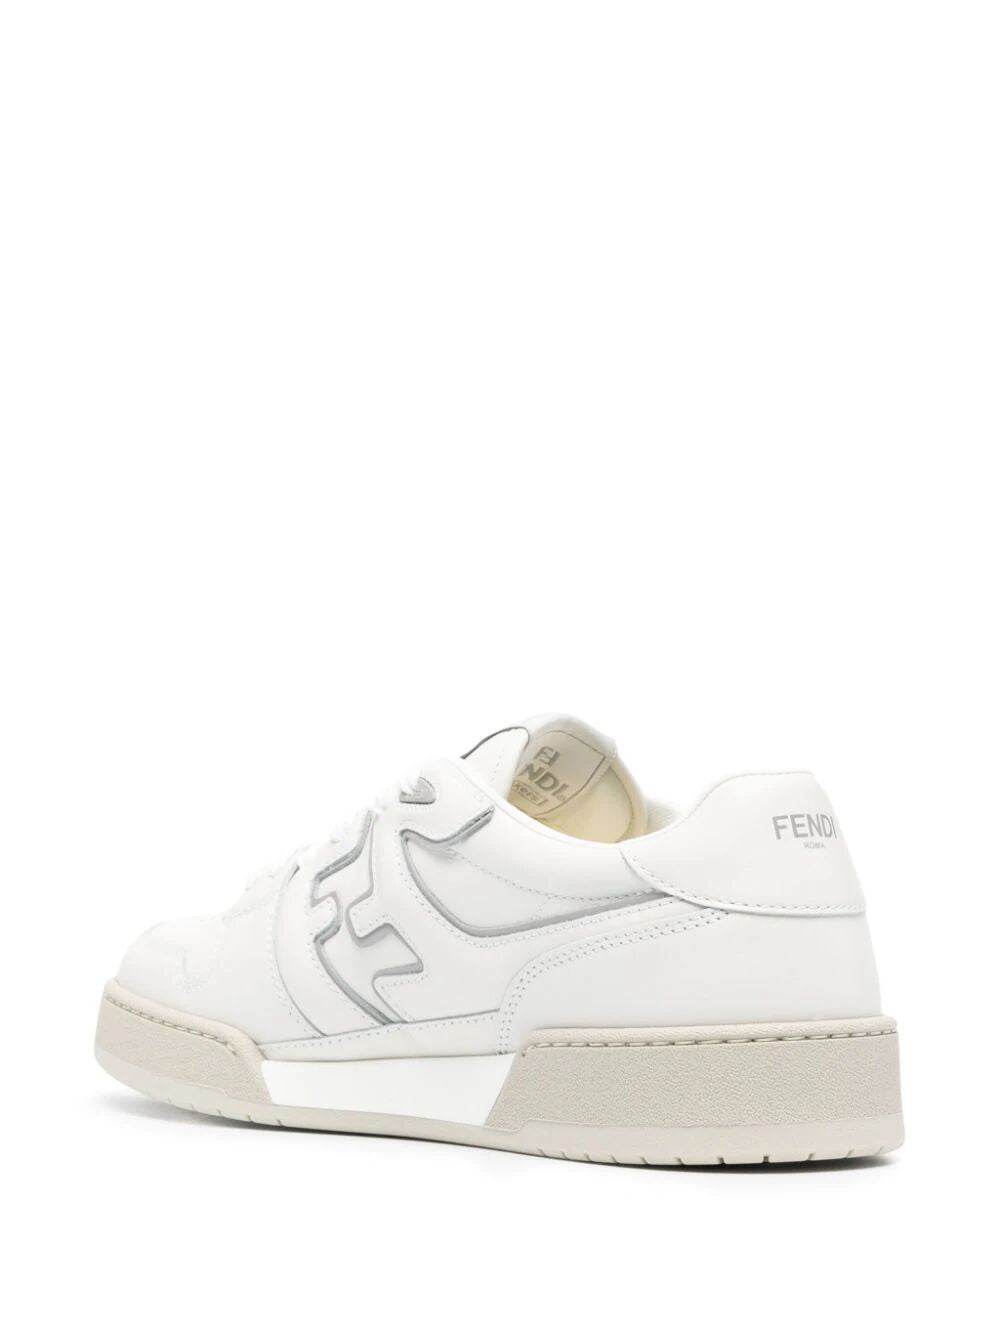 FENDI White Leather Sneakers with Grey Inserts and FF Logo for Men